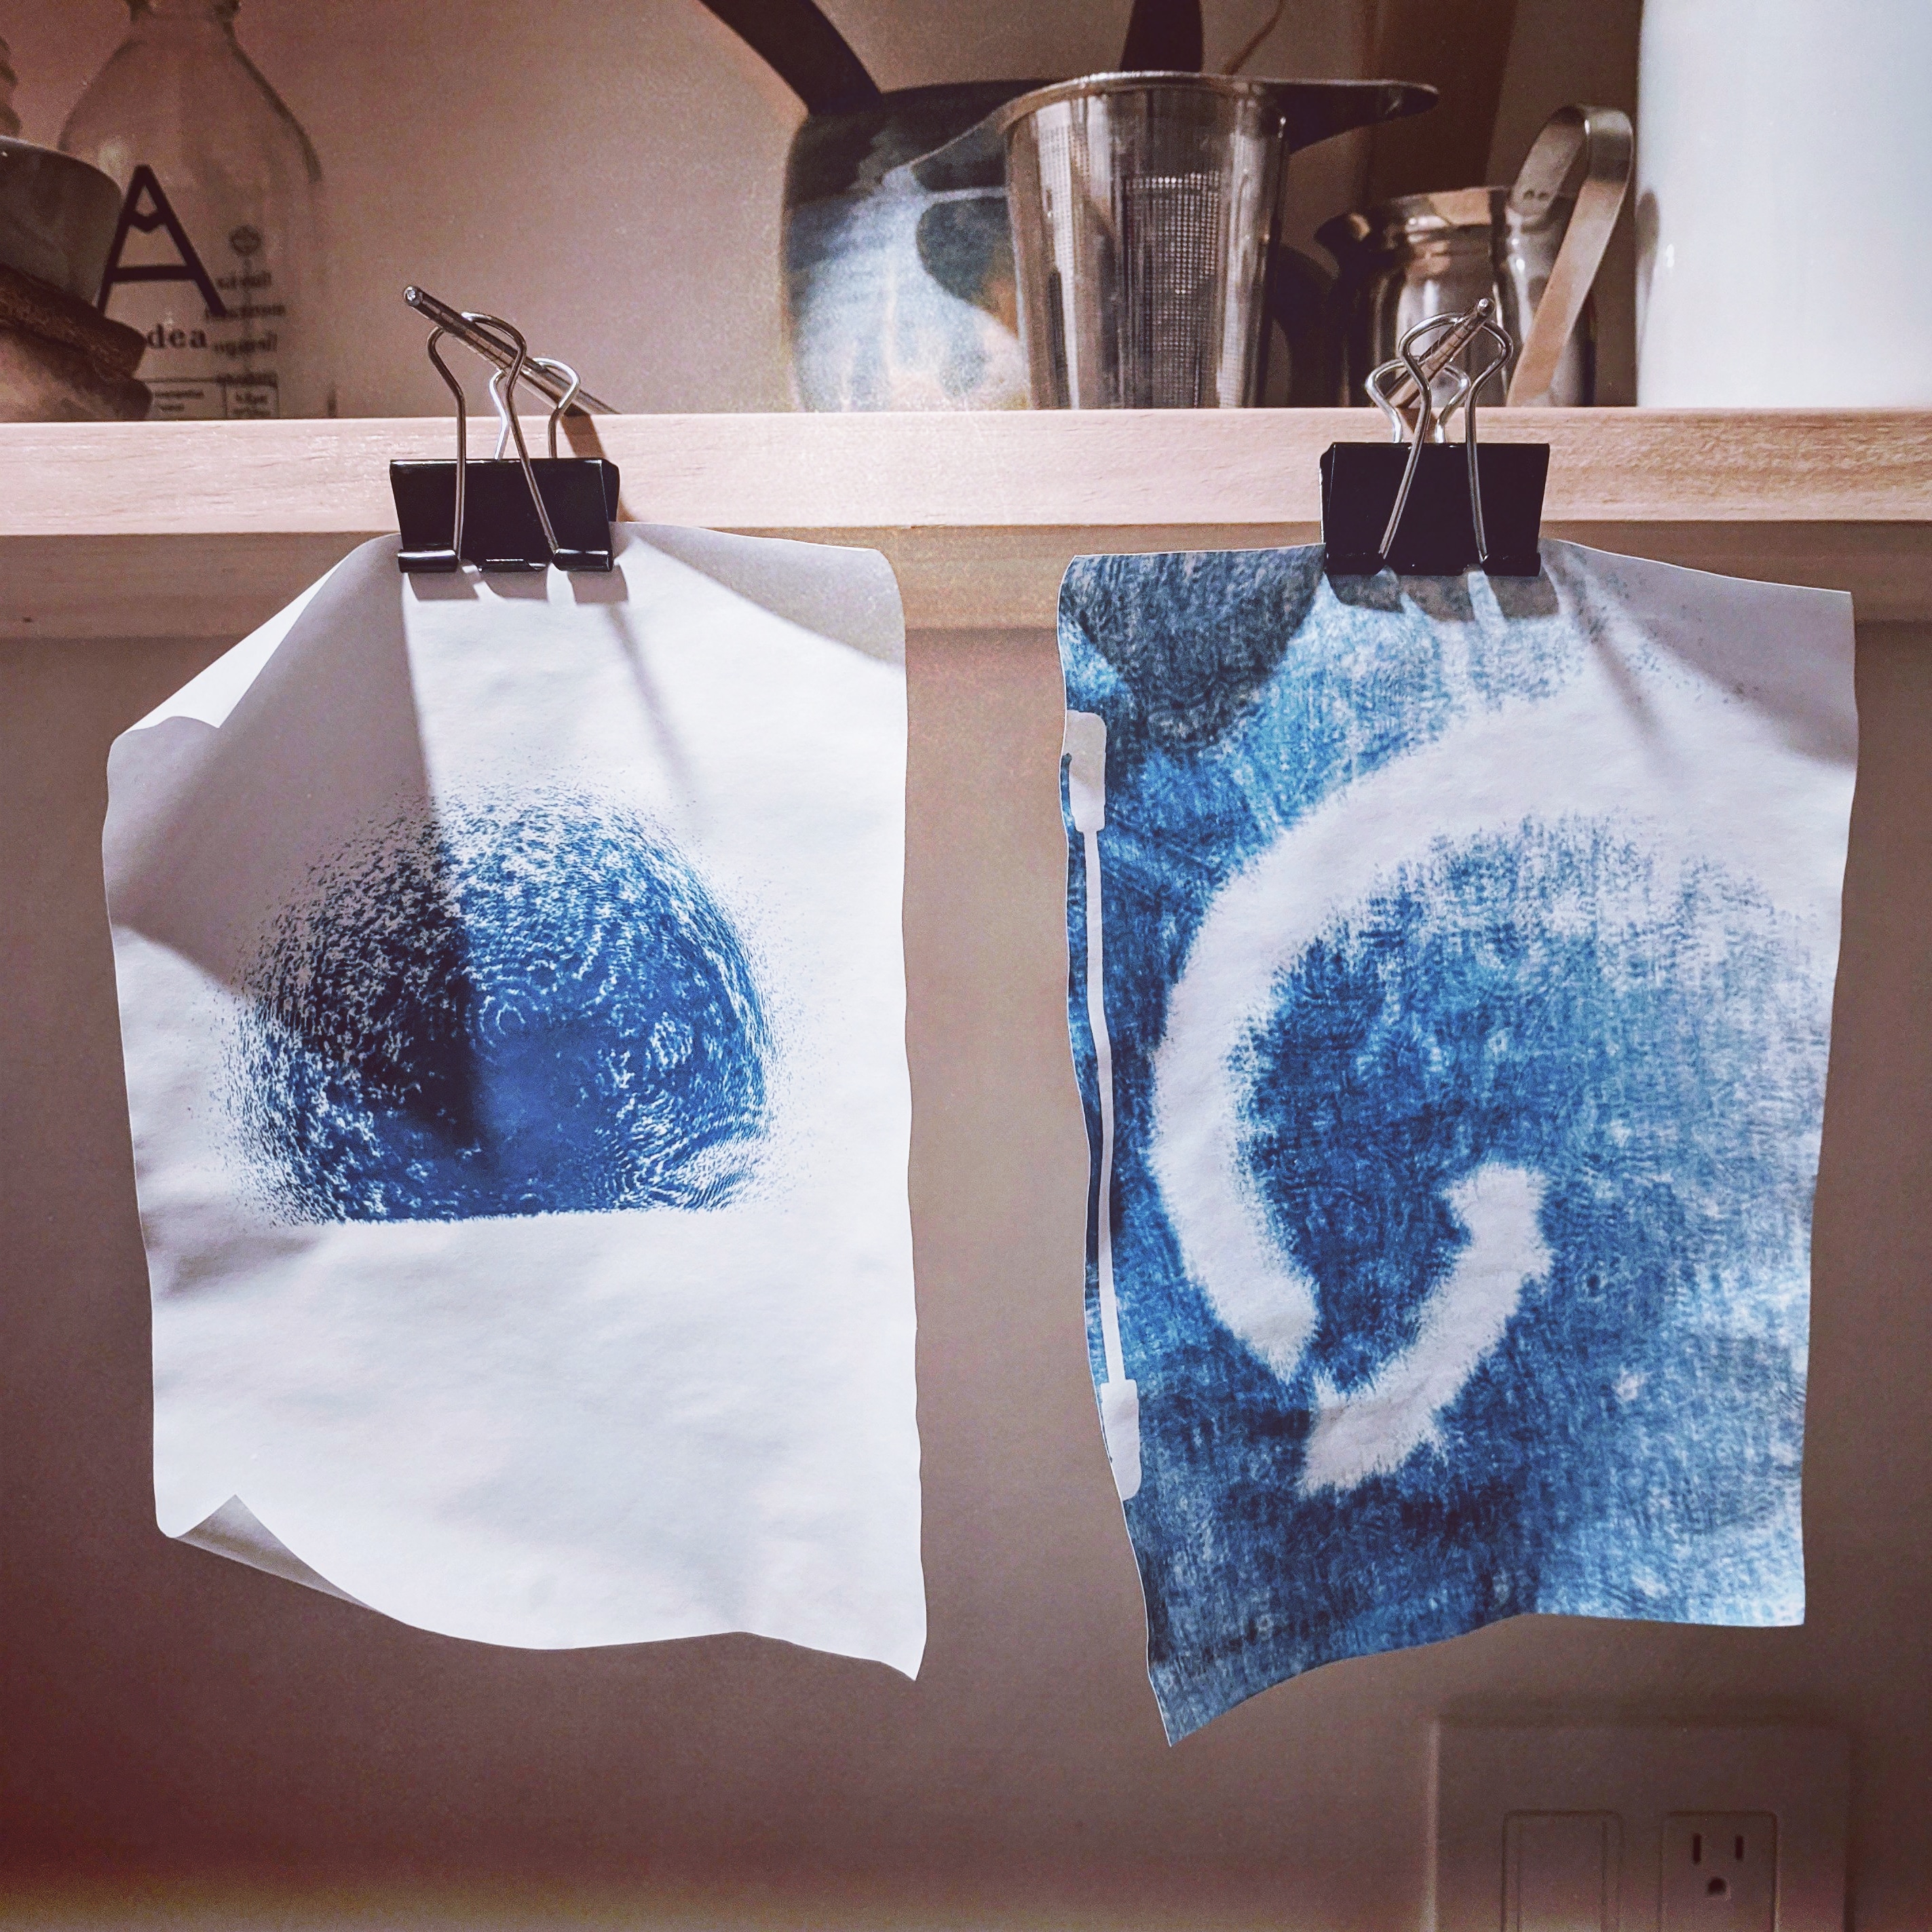 two cyanotype prints hanging from a shelf, showing microscopic images, including one of a millipede